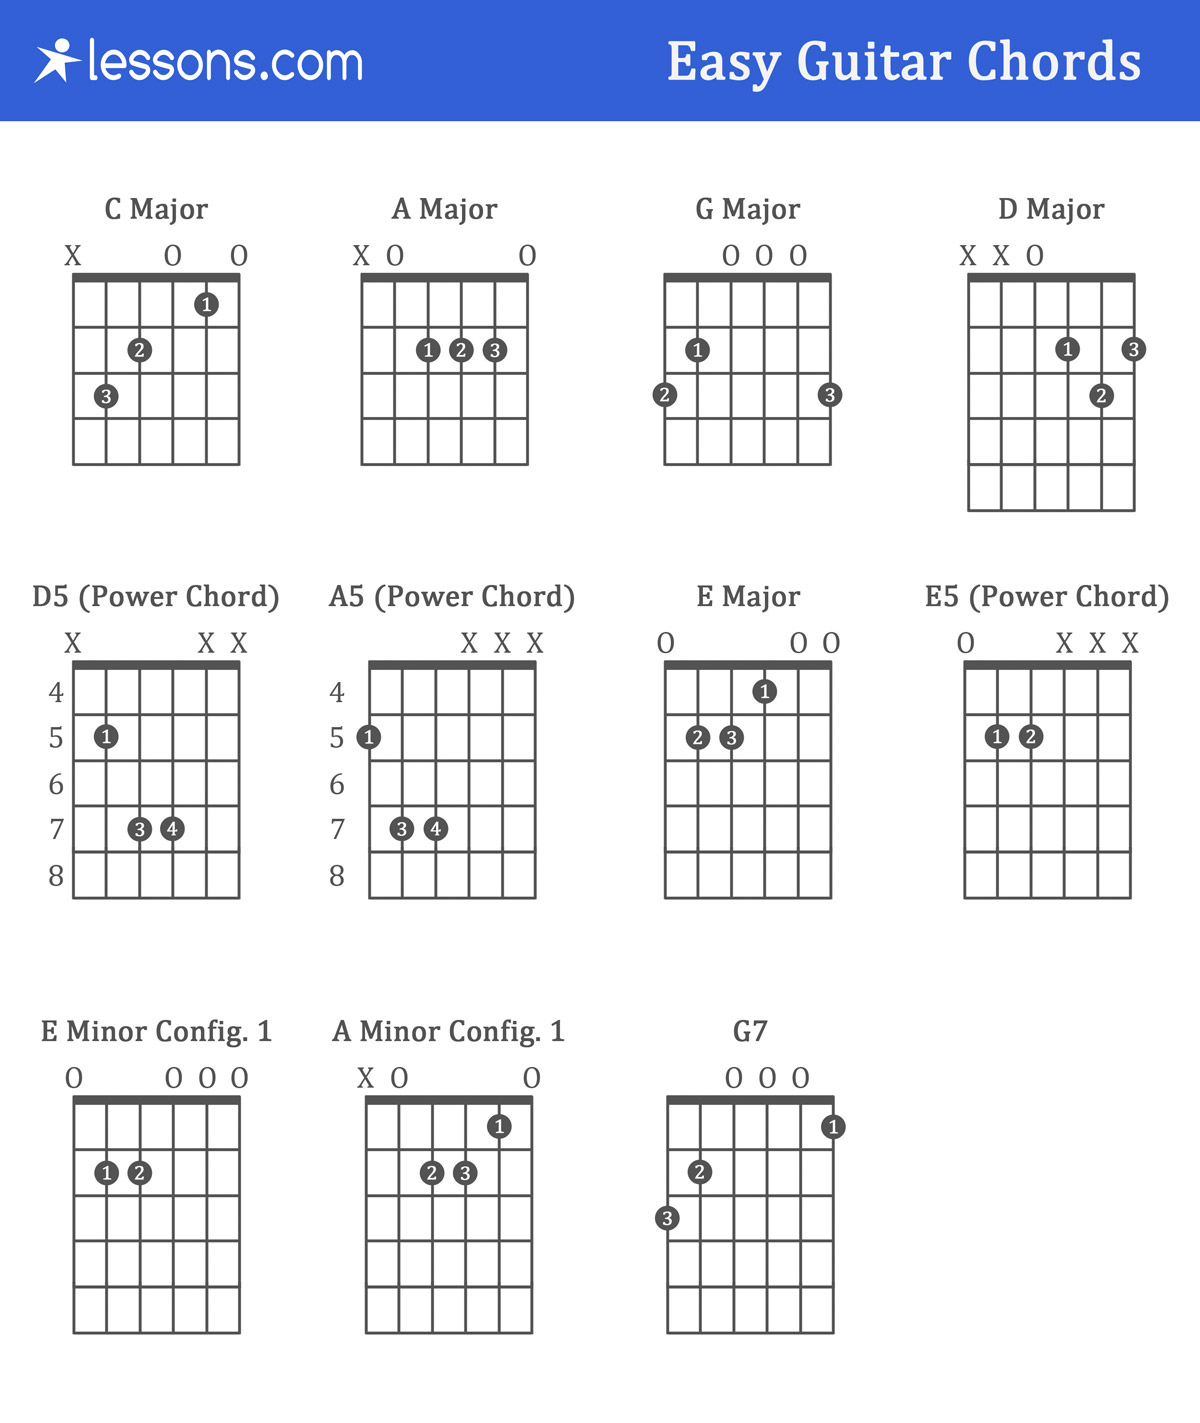 Chords For Guitar The 11 Easy Guitar Chords For Beginners With Charts Examples